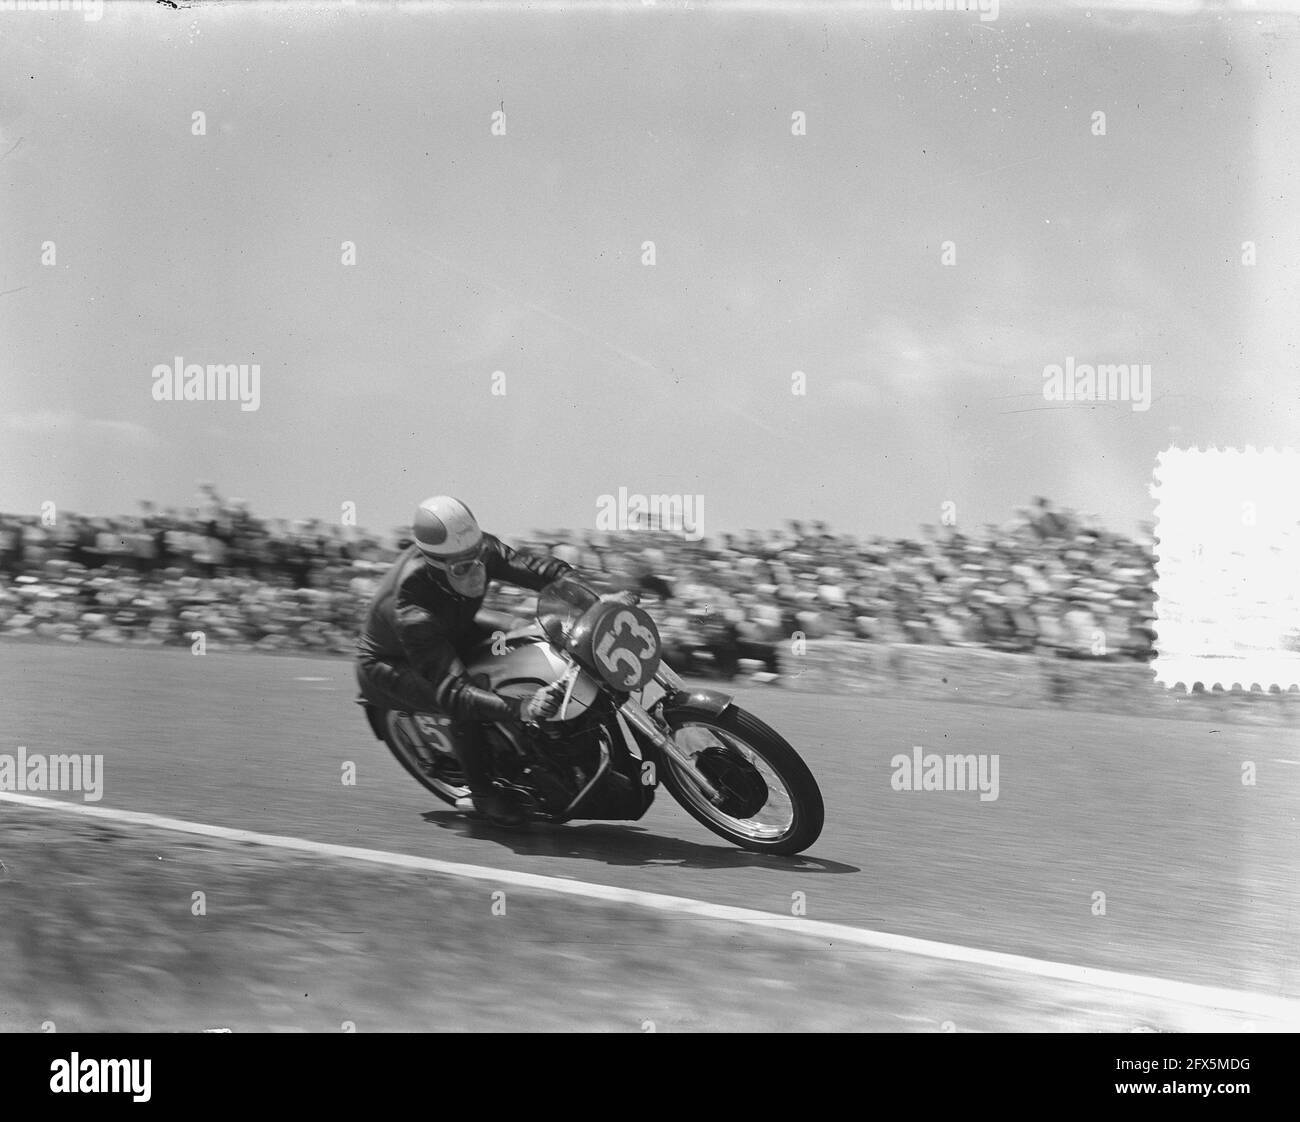 Geoff Duke winner of the 350cc race, June 27, 1952, motorsports, The Netherlands, 20th century press agency photo, news to remember, documentary, historic photography 1945-1990, visual stories, human history of the Twentieth Century, capturing moments in time Stock Photo